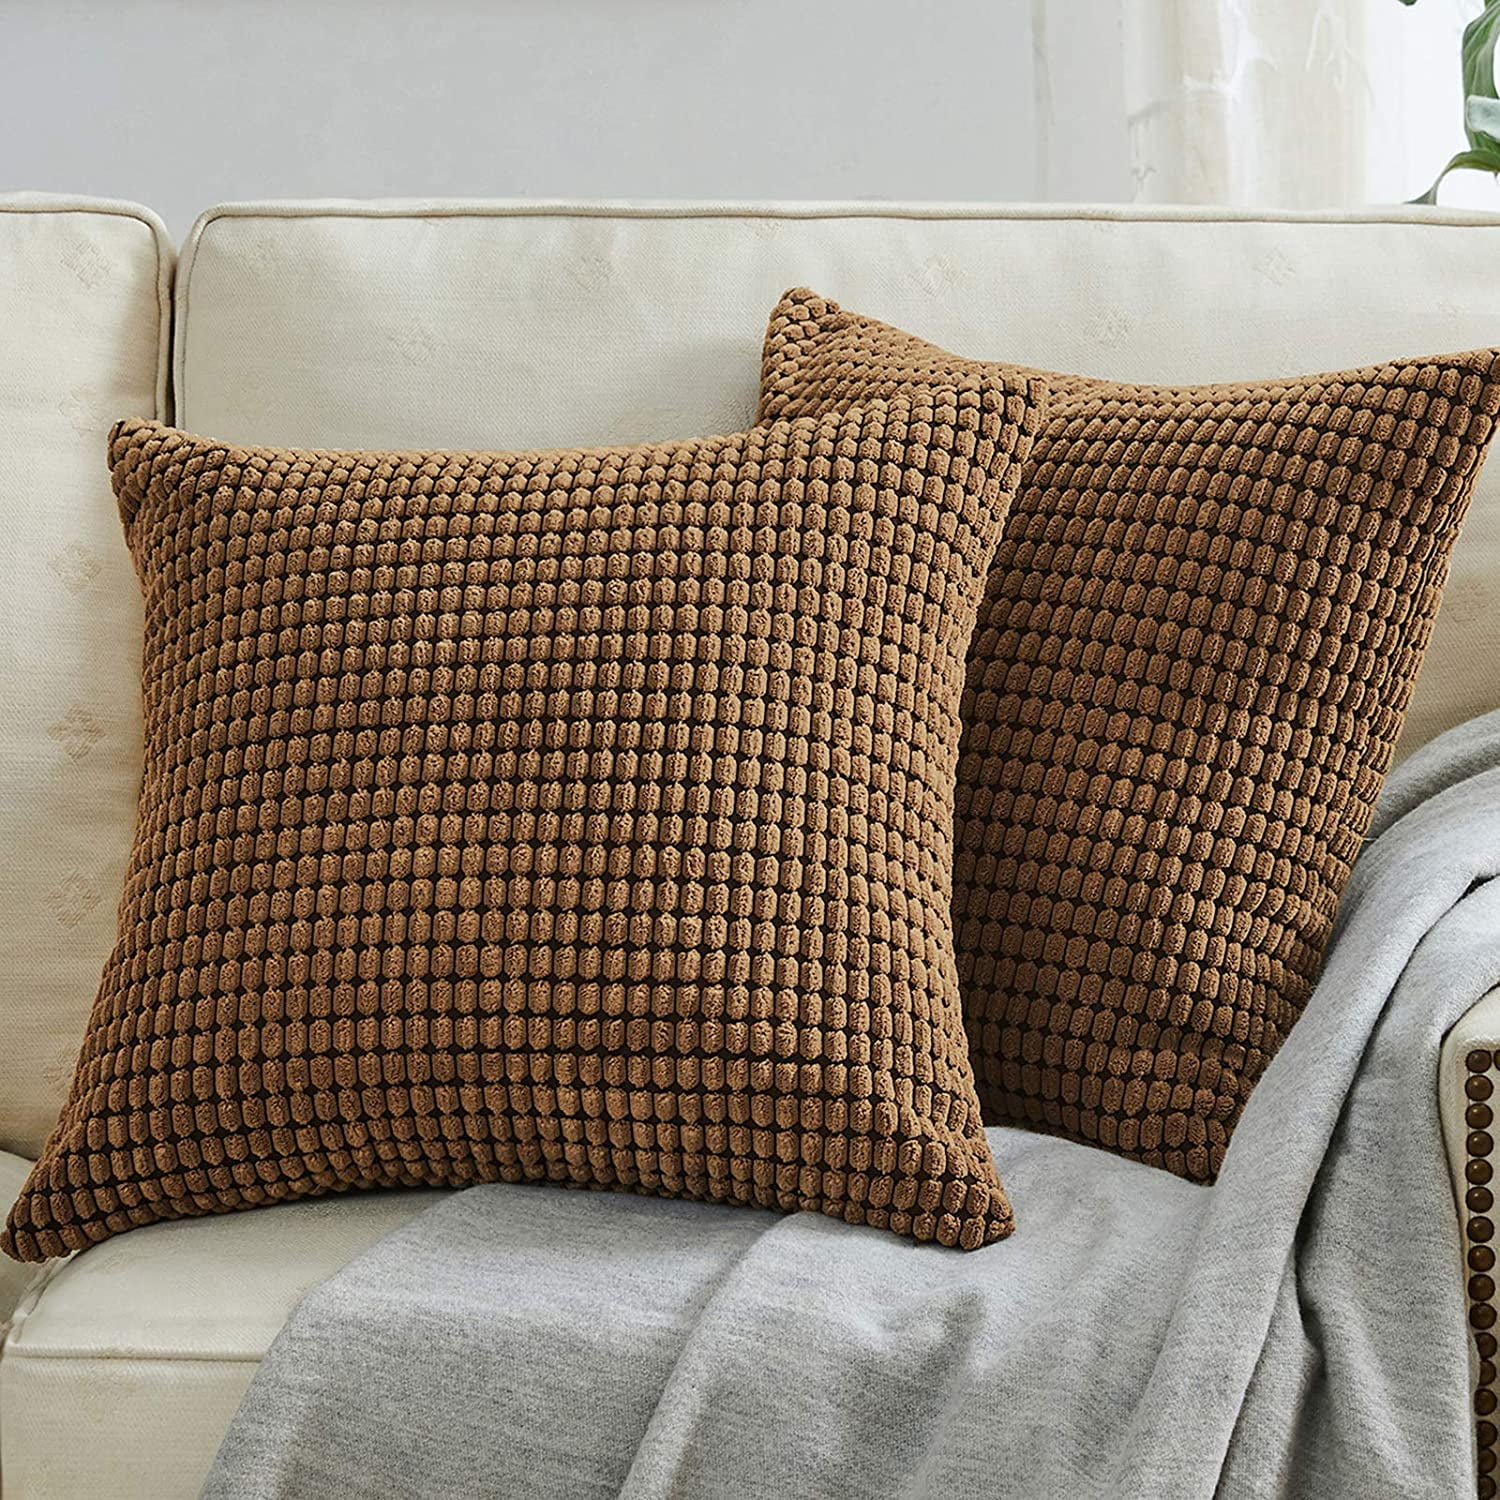 FabricMCC Pillow CoversSet of 2 Pillow Covers 24x24,Decorative Euro Pillow Covers Corn Striped